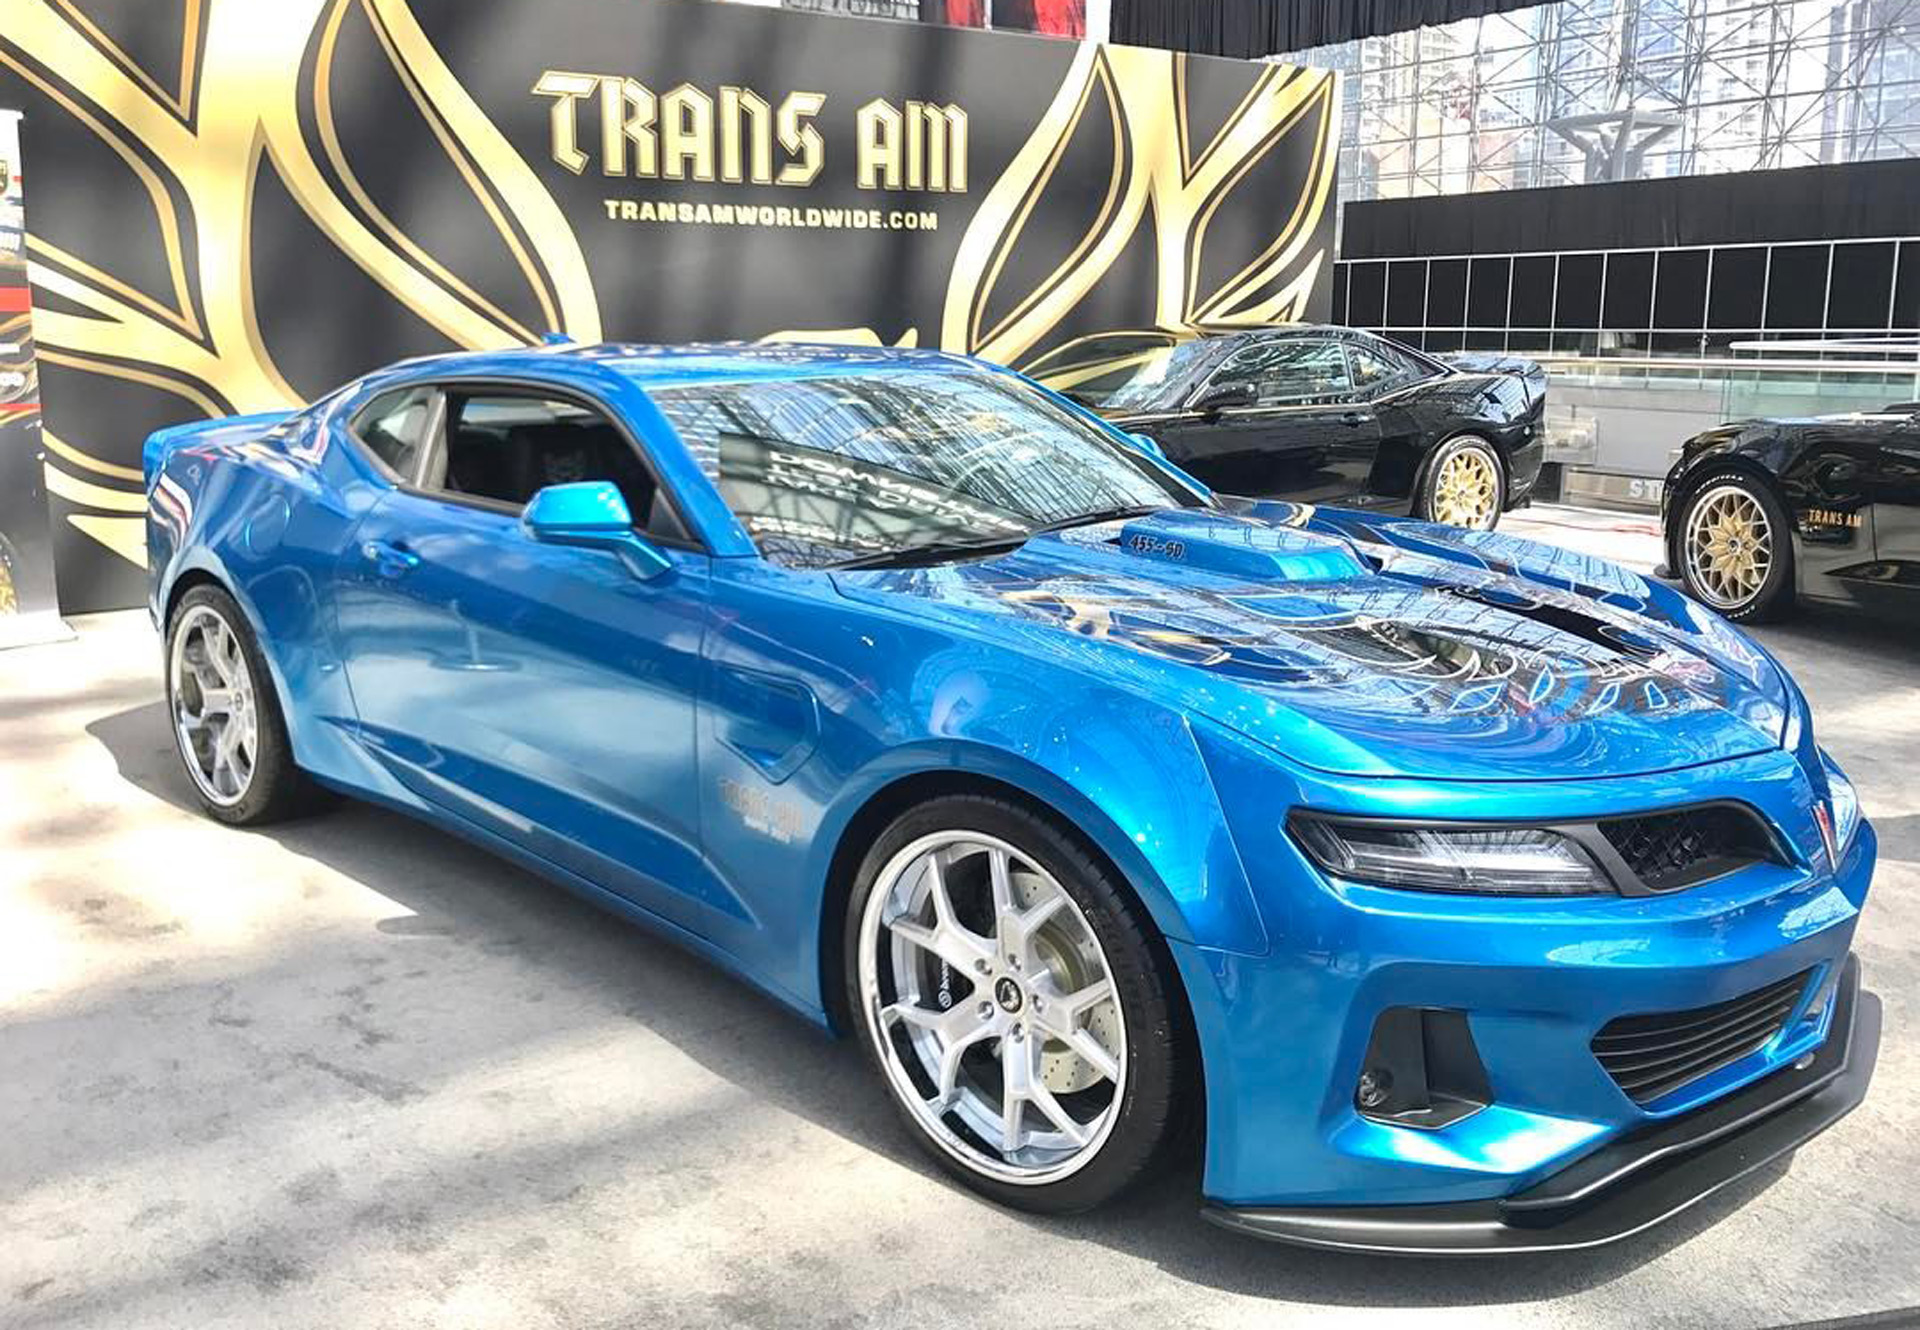 bruce mayes add pics of the new trans am photo